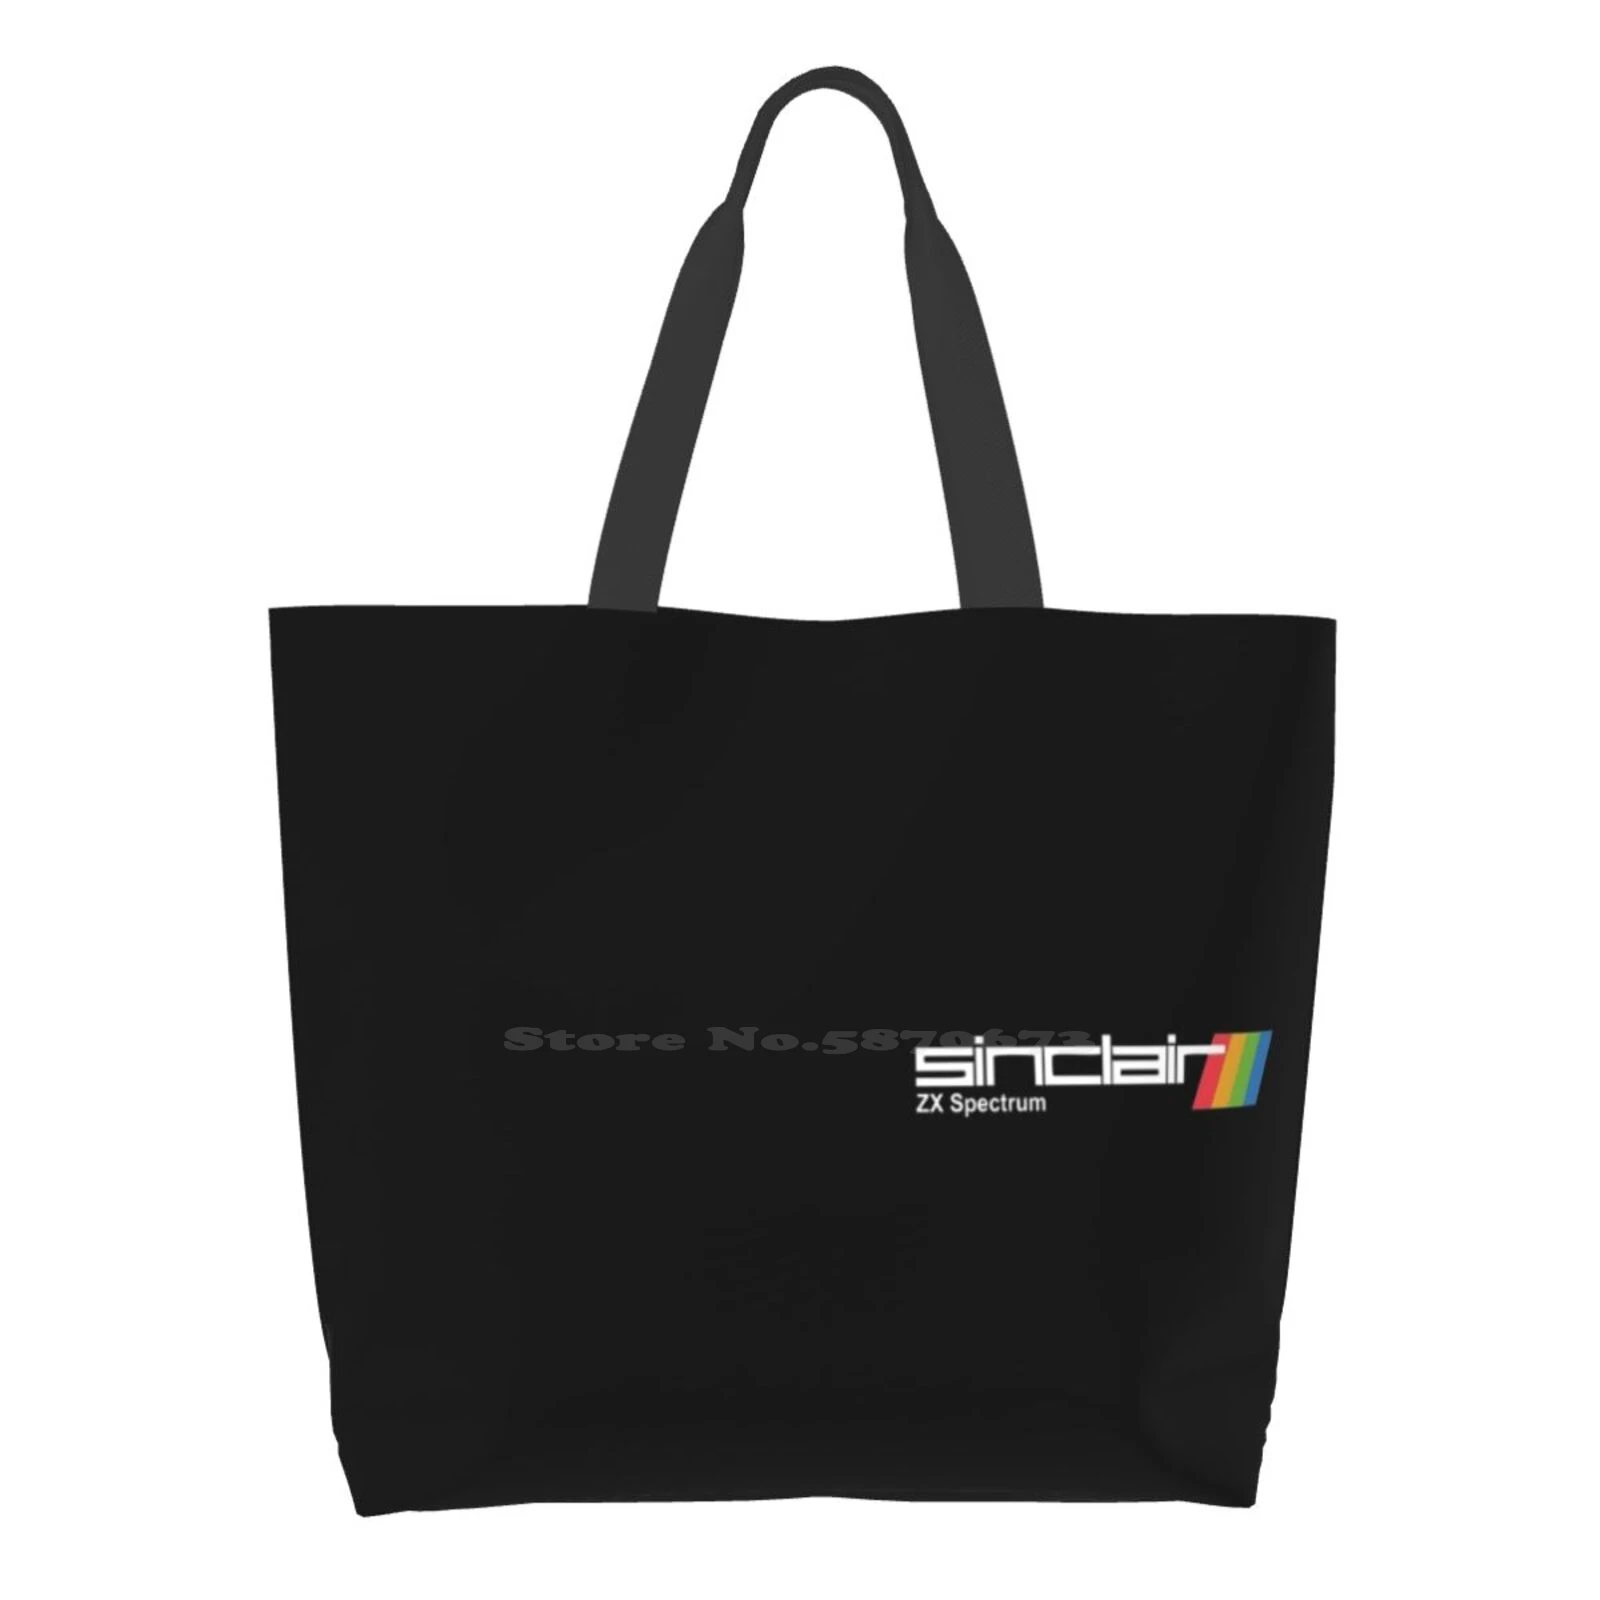 

Zx Spectrum High Quality Large Size Tote Bag Zx Spectrum Spectrum Retro Zx 80 Zx Spectrum Vintage Gaming Gamer 1980 Computer 8